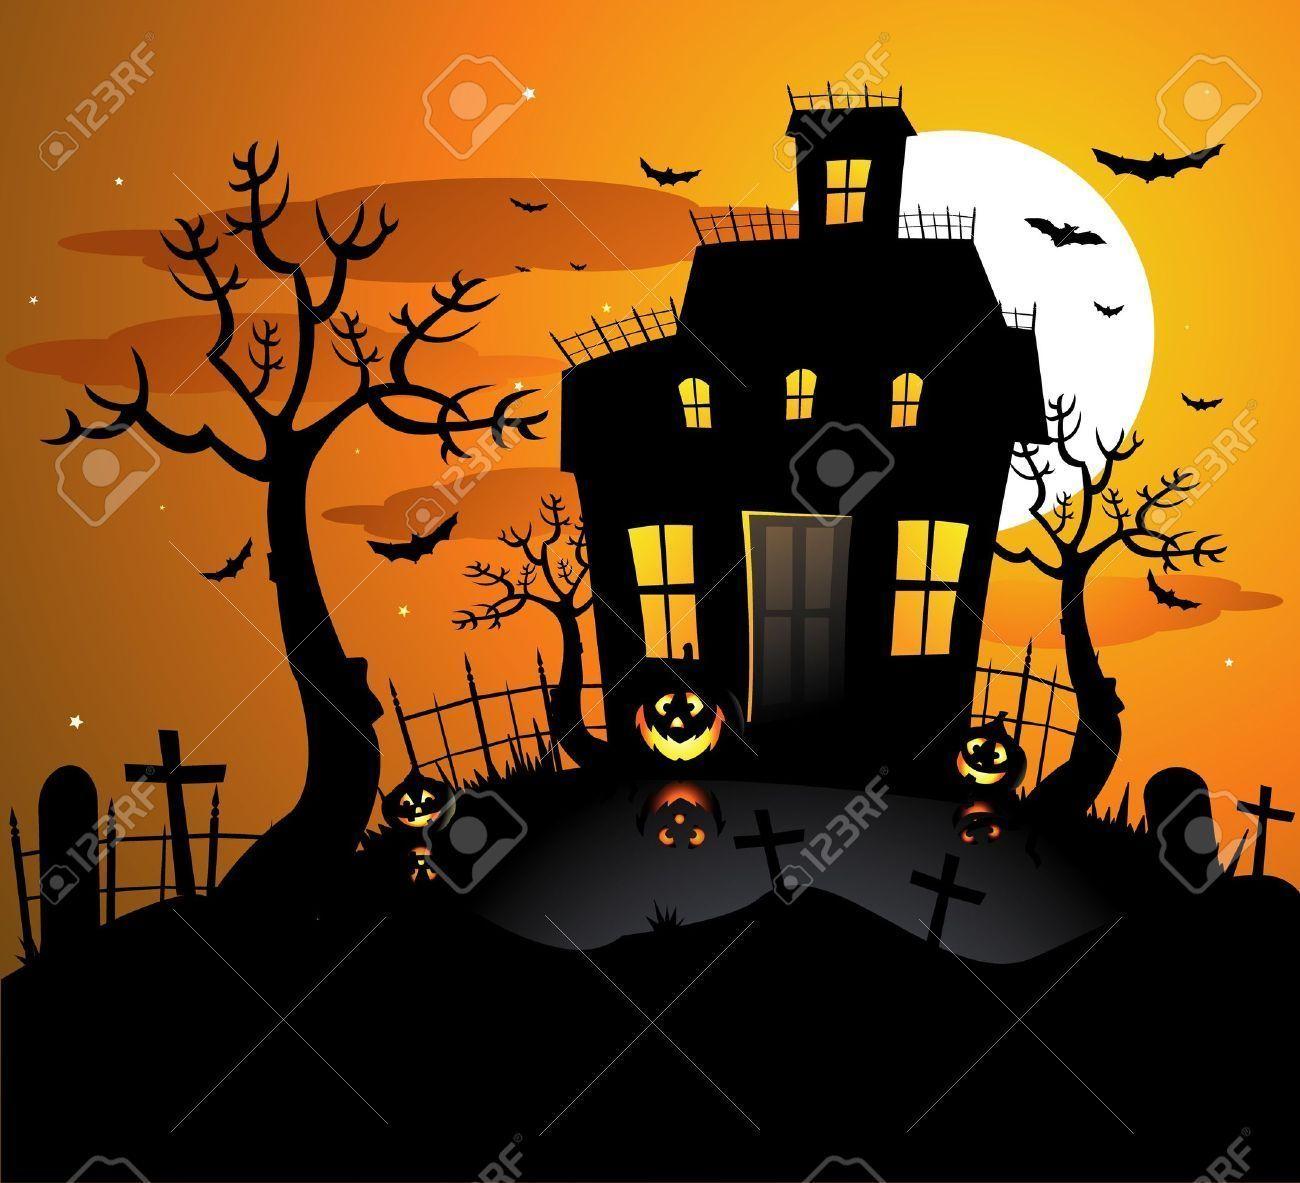 Haunted House Image, Stock Picture, Royalty Free Haunted House